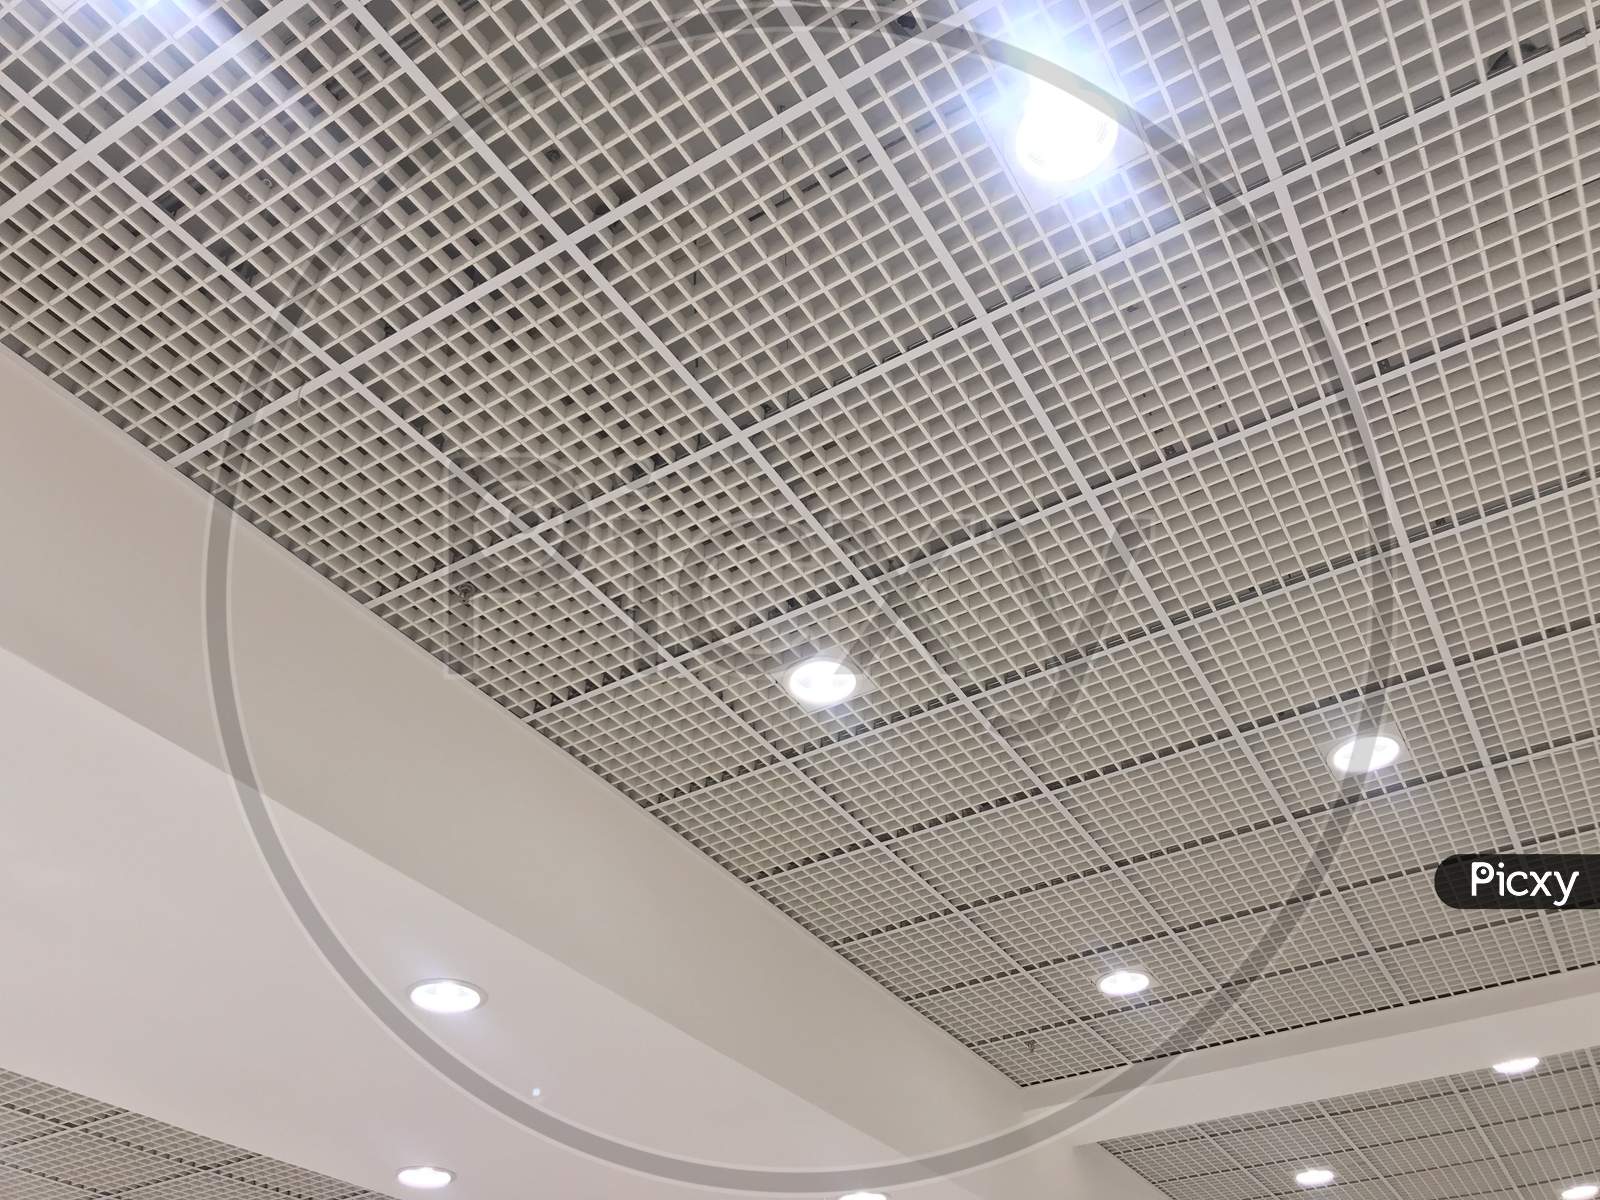 An White Painted Emulsion Painted For An Gypsum Ceiling With Macro Grid Ceiling For An Suspended False Ceiling Of An Shopping Mall Interiors Architecture Work In Muscat Oman